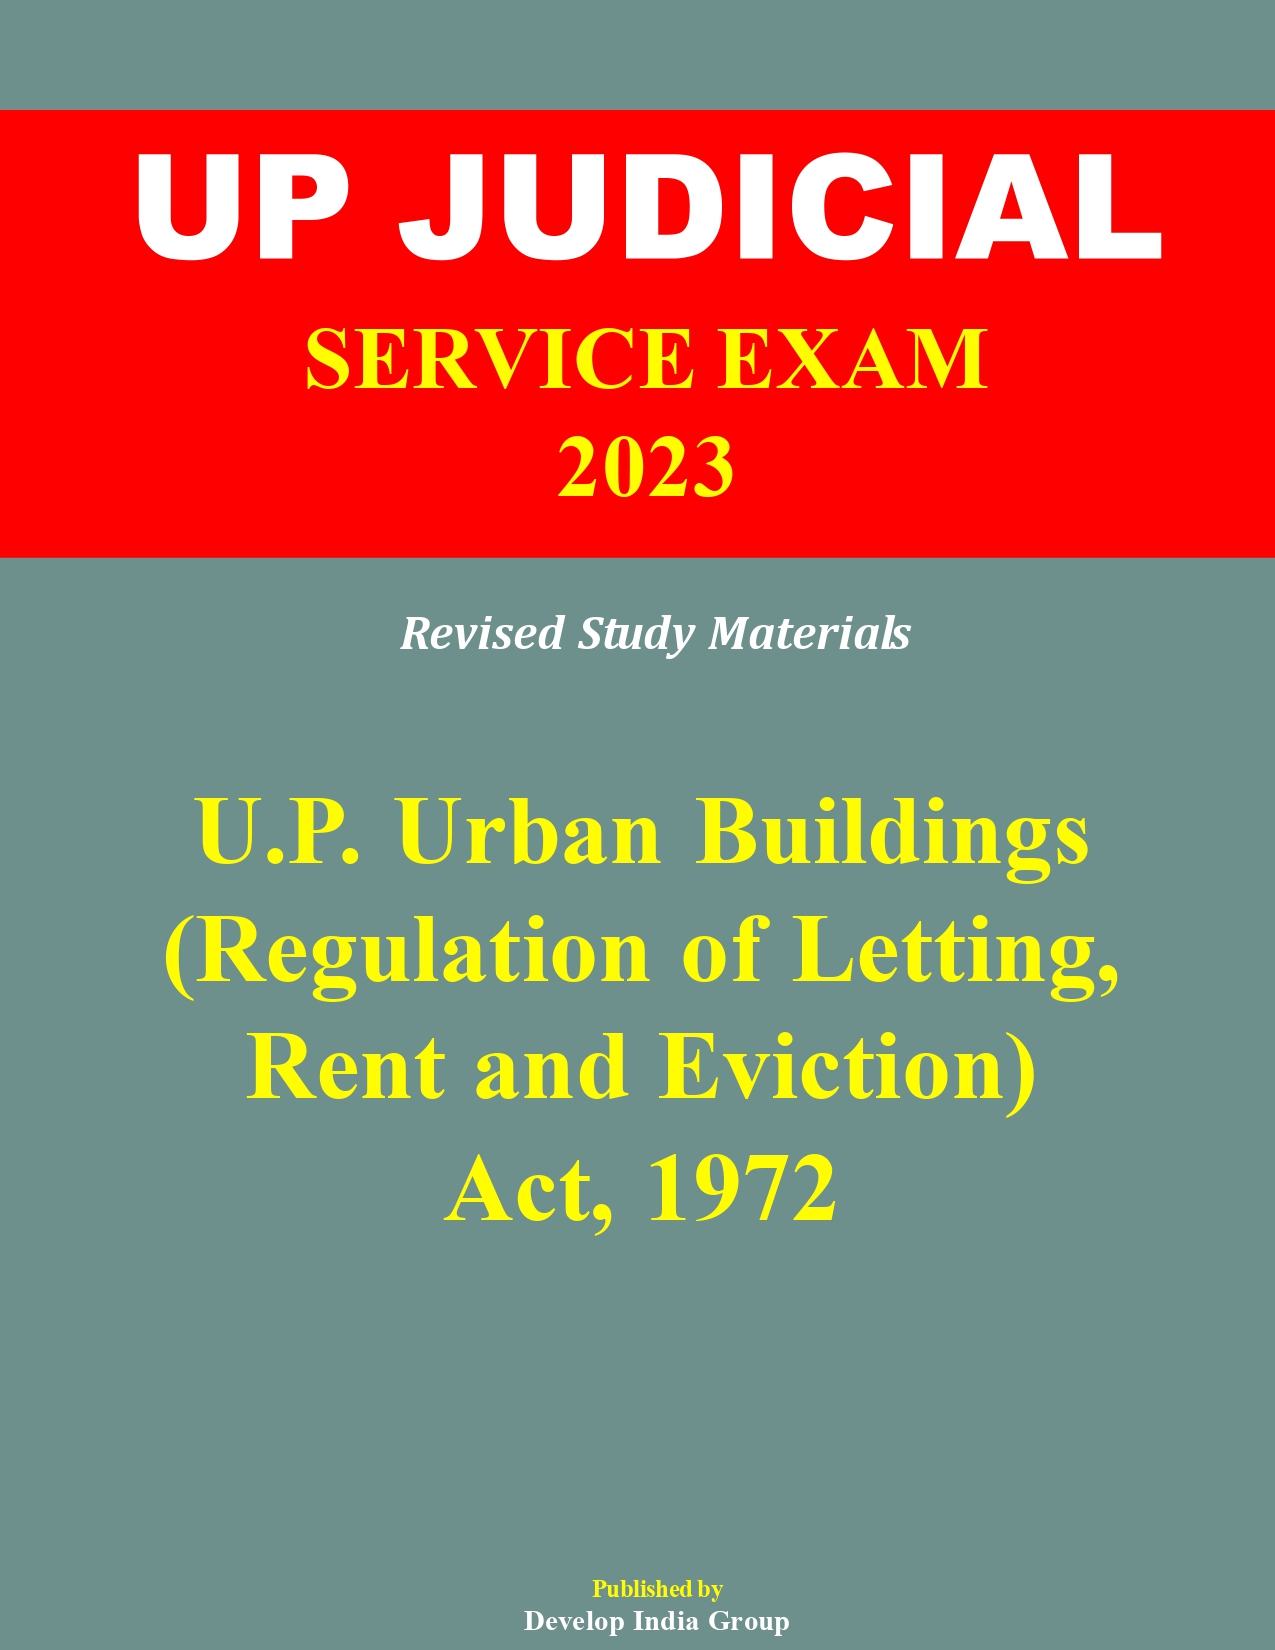 U.P. Urban Buildings (Regulation of Letting, Rent and Eviction) Act, 1972 sample_page-0001